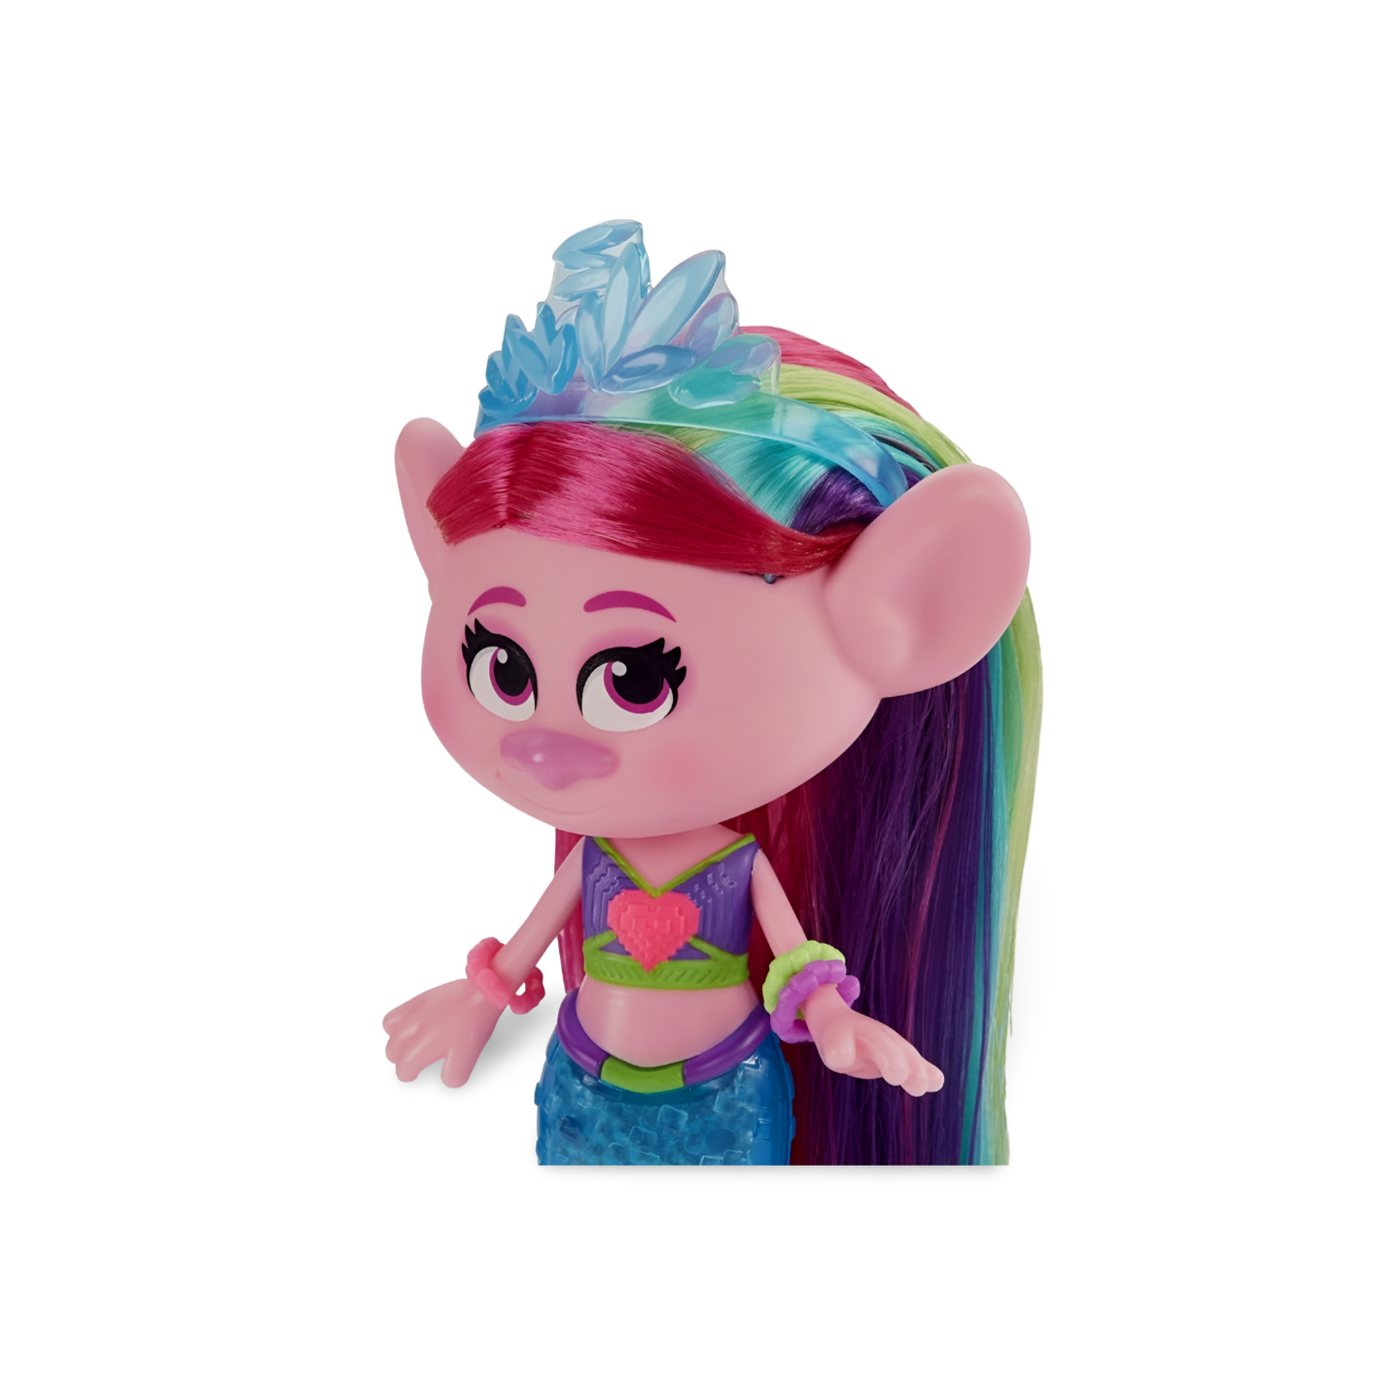 Trolls DreamWorksTopia Techno Mermaid Poppy Doll, Tail Lights Up in or Out of Water, Toy for Girls and Boys 4 Years Old and Up